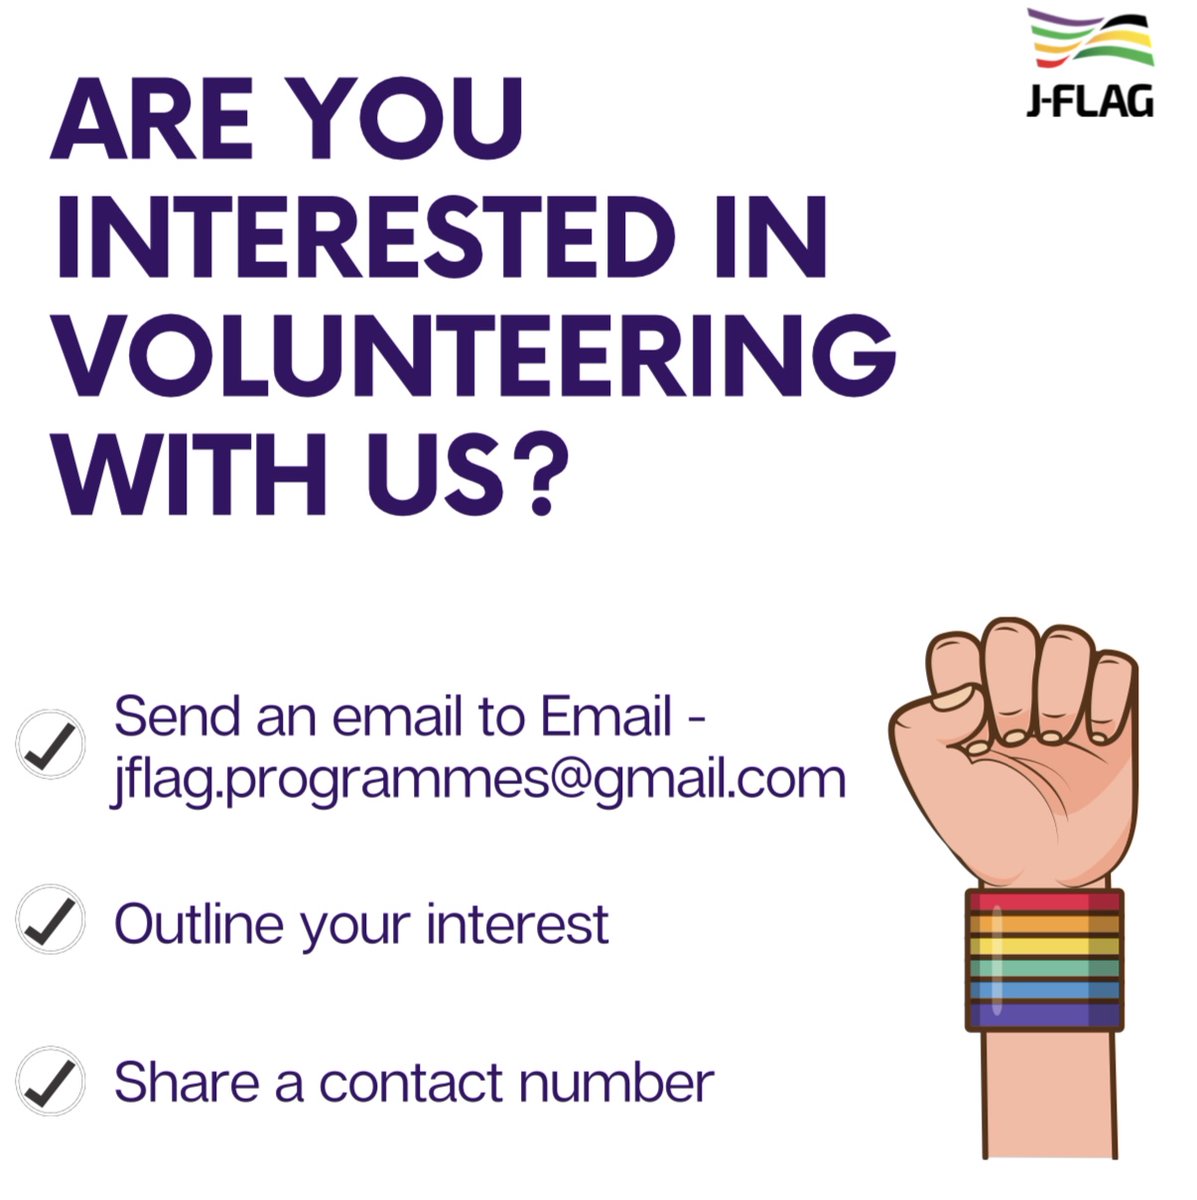 Equality Jamaica Are You Interested In Volunteering With Us Then Here S Your Chance We Are Inviting All Interested Persons To Send Us An Email At Jflag Programmes Gmail Com And Tell Us What